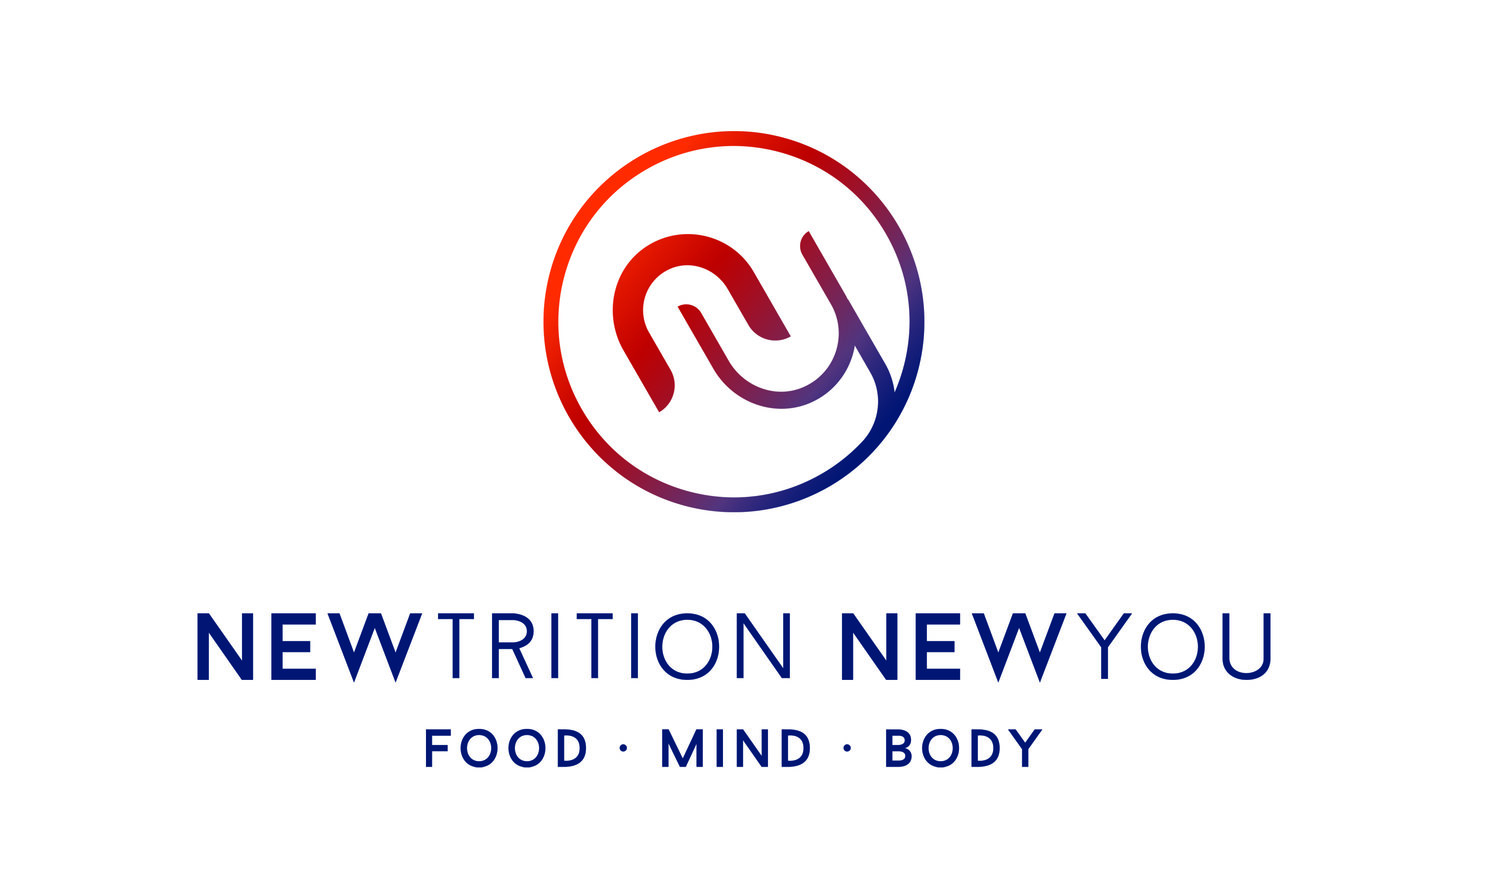 Newtrition New You